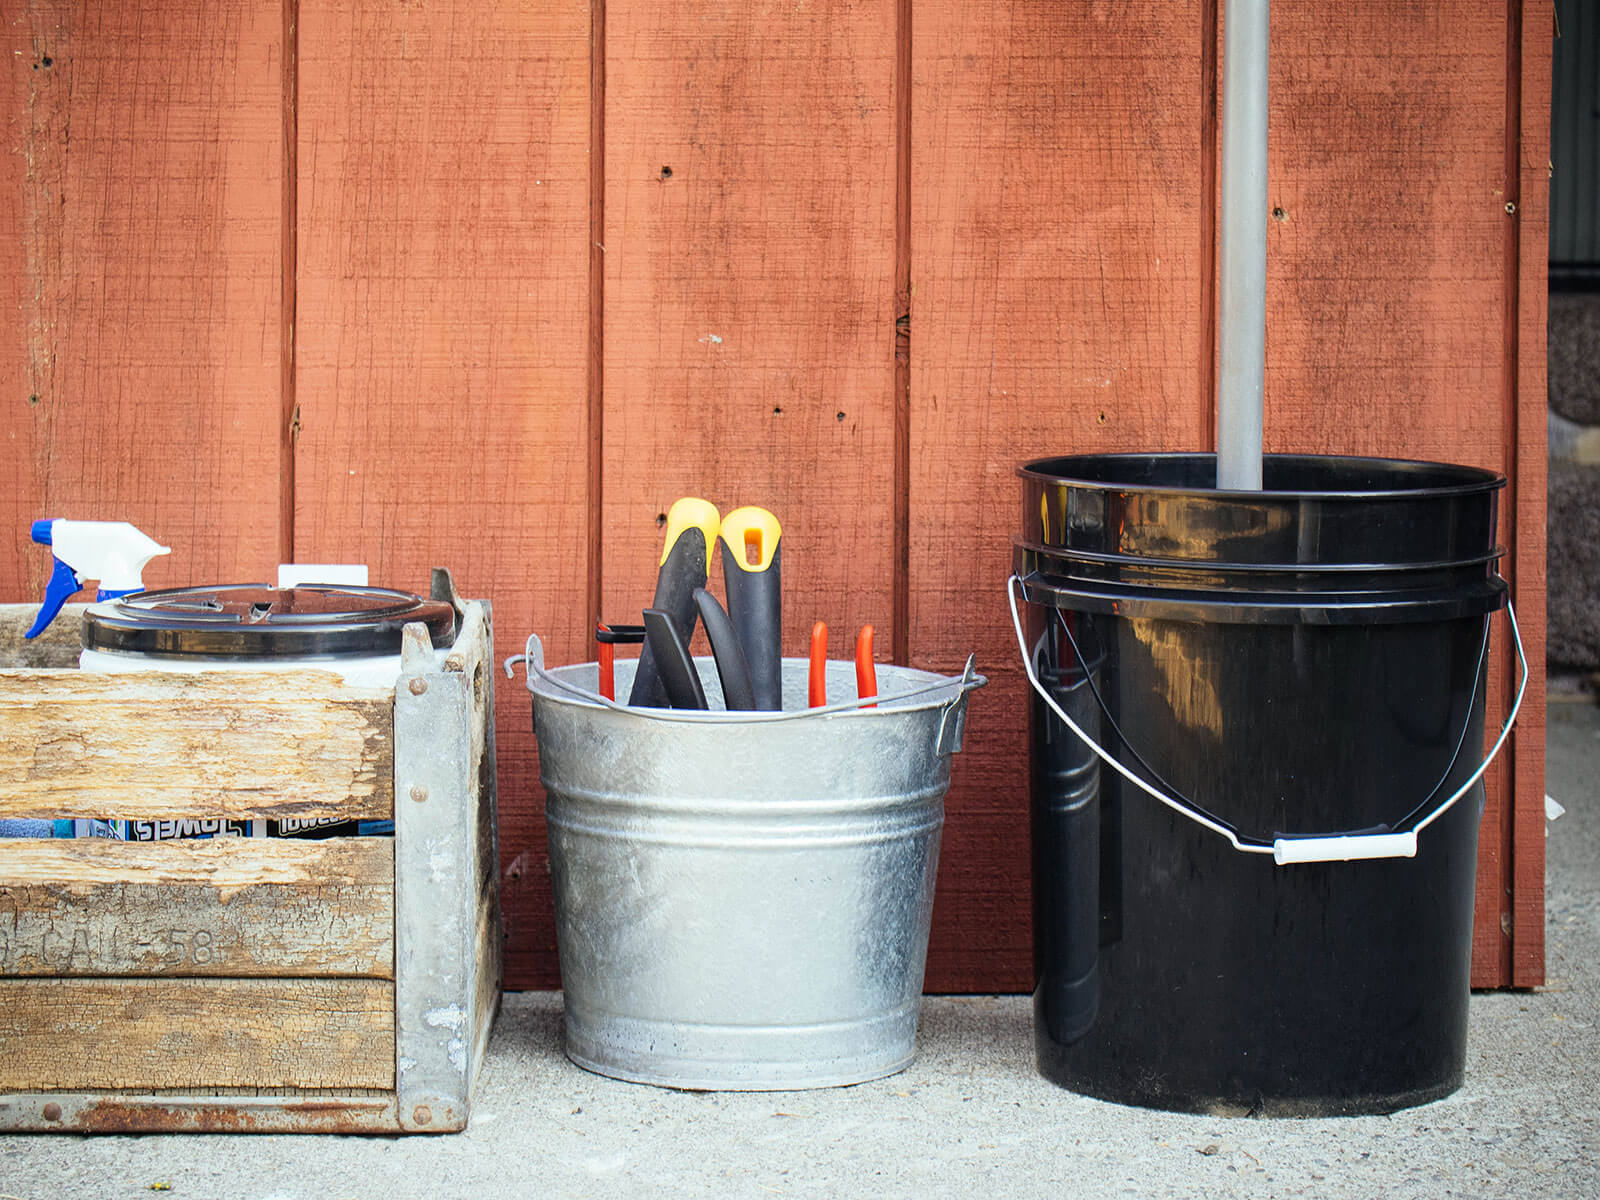 Crate of cleaning supplies and two buckets filled with tools, set against a shed wall